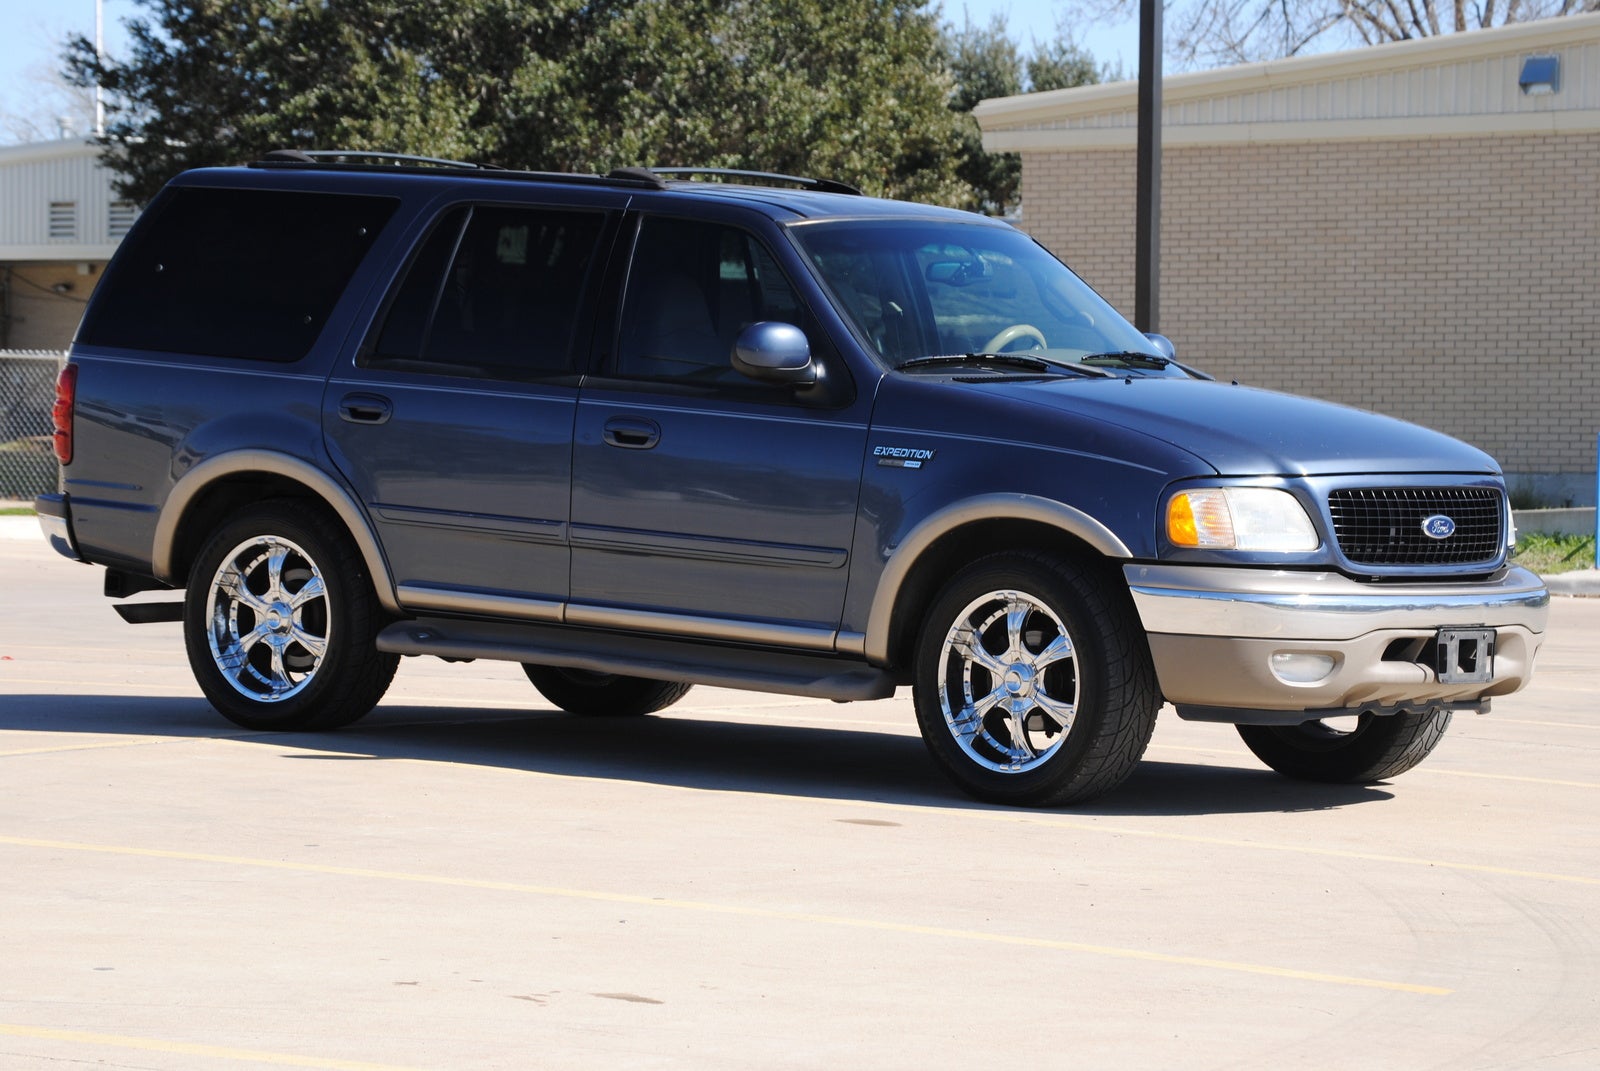 2002 Ford expedition edie bauer